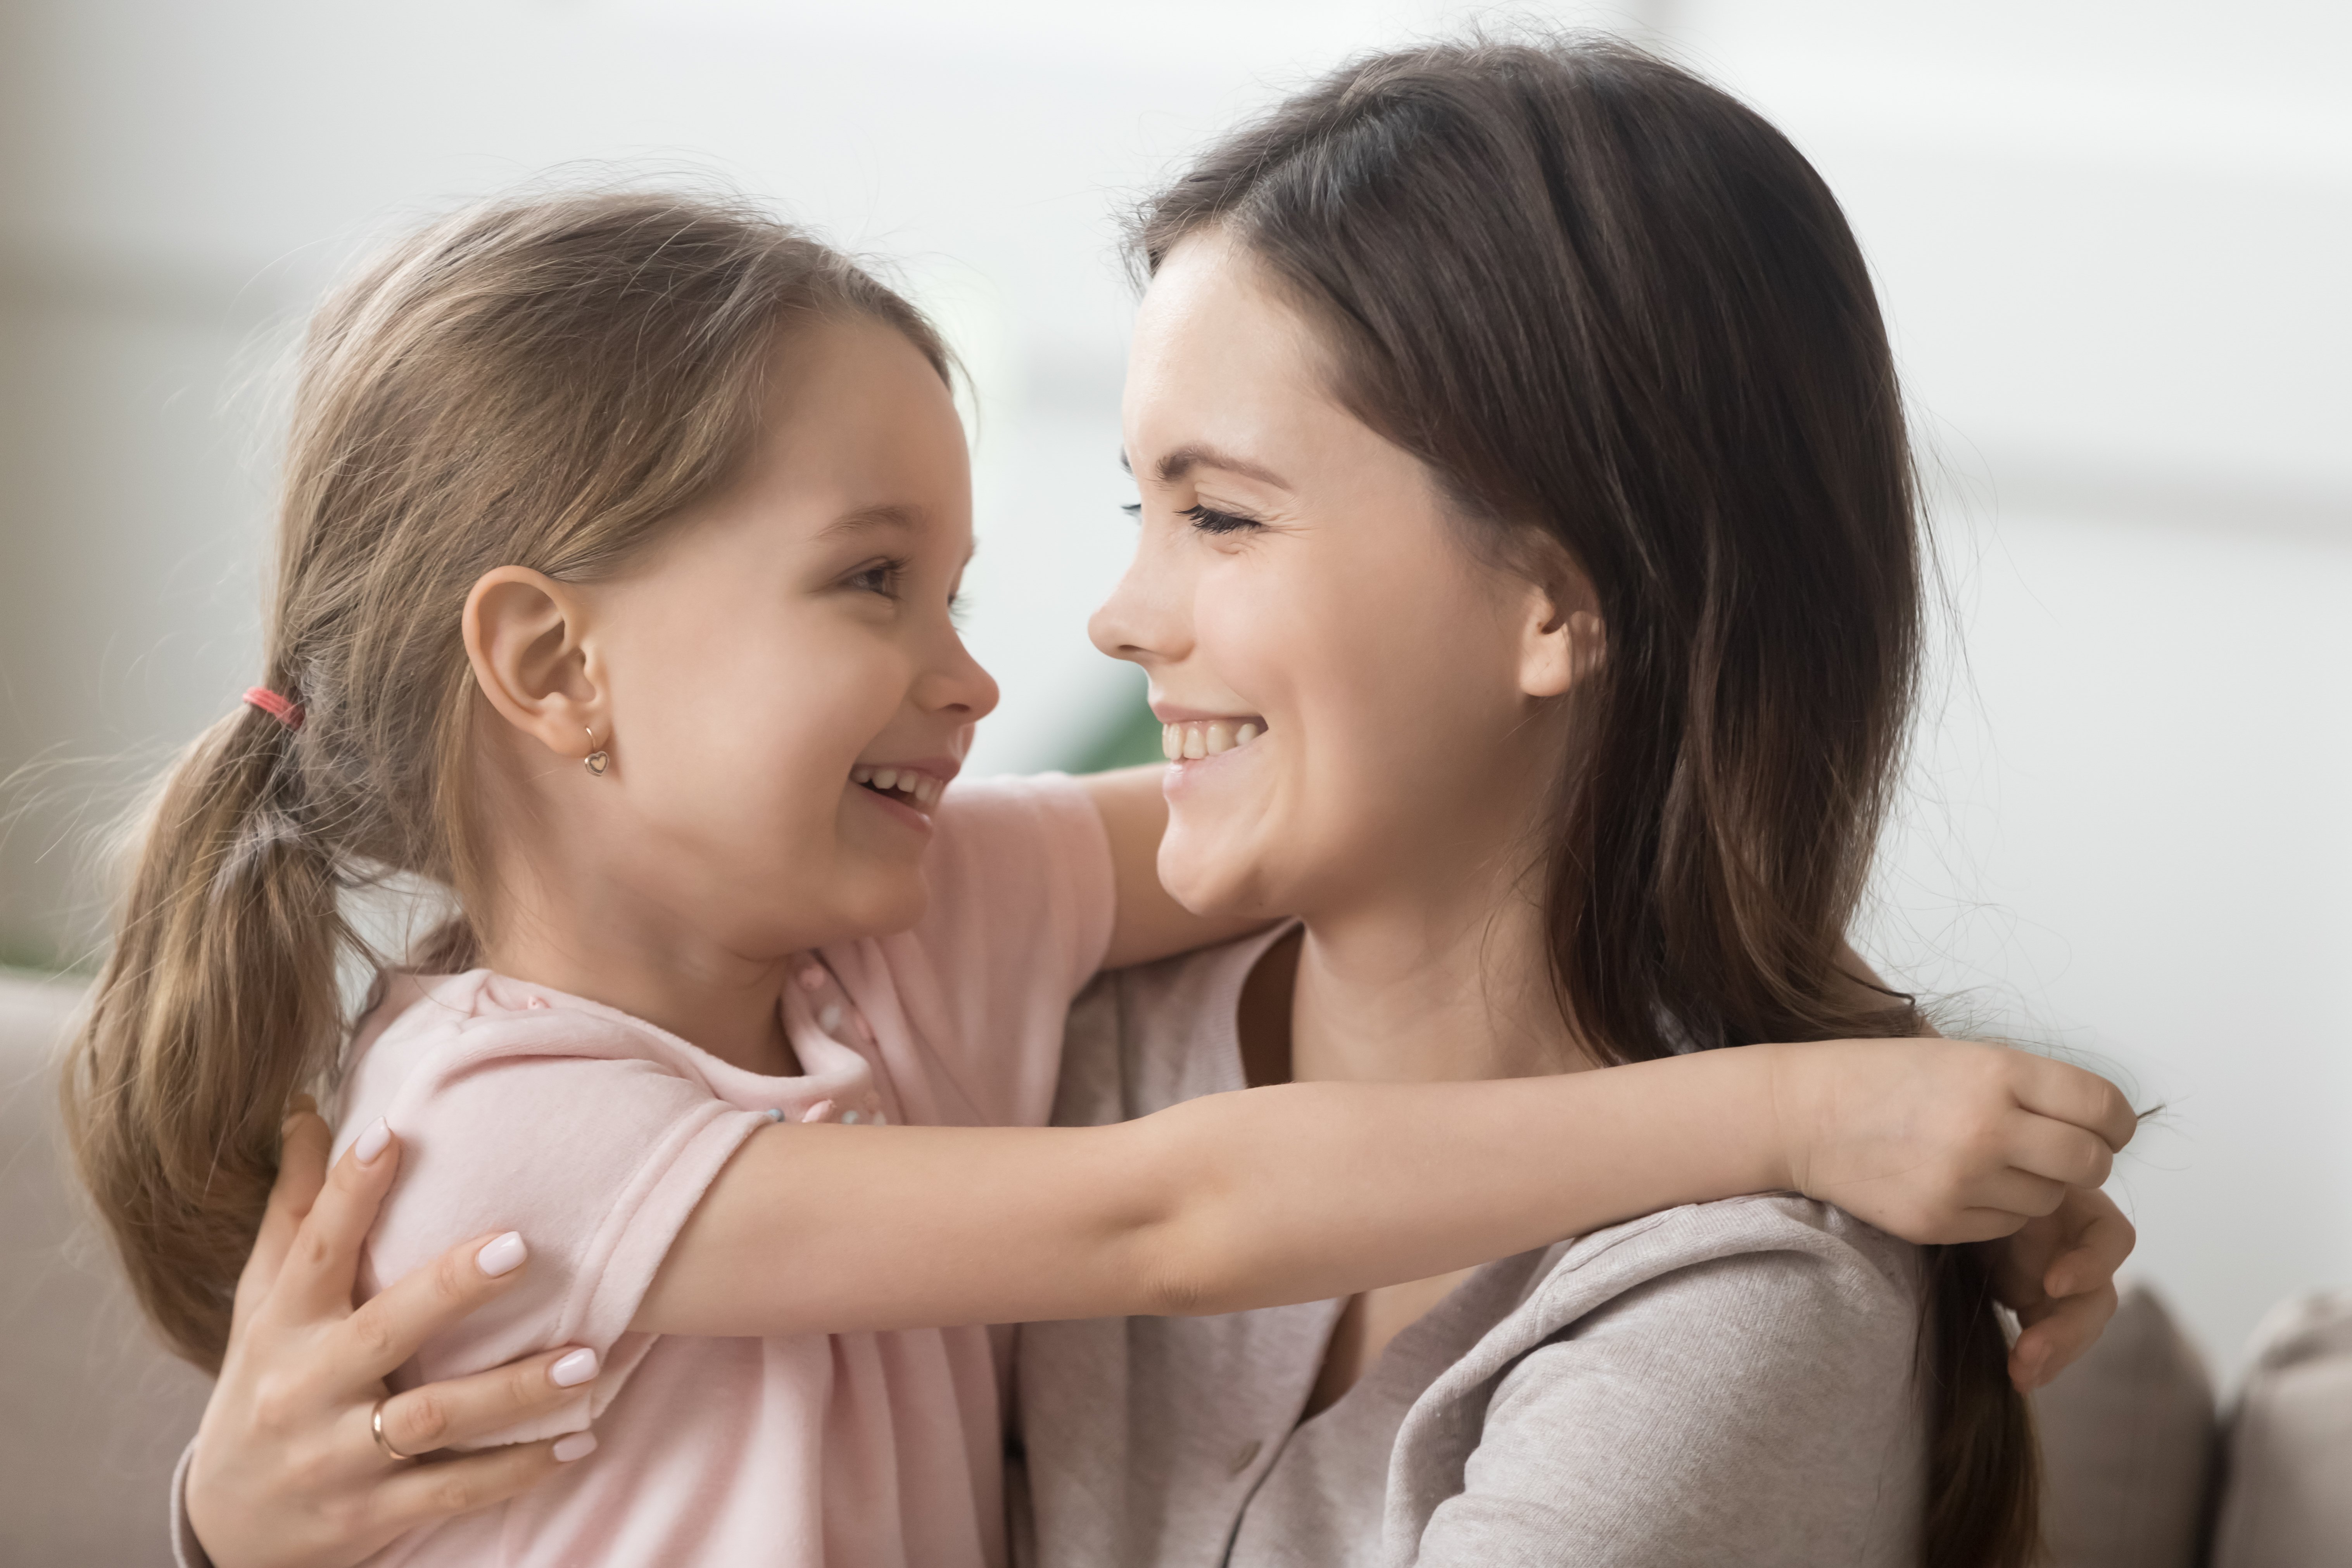 Smiling mother and daughter | Source: Shutterstock.com